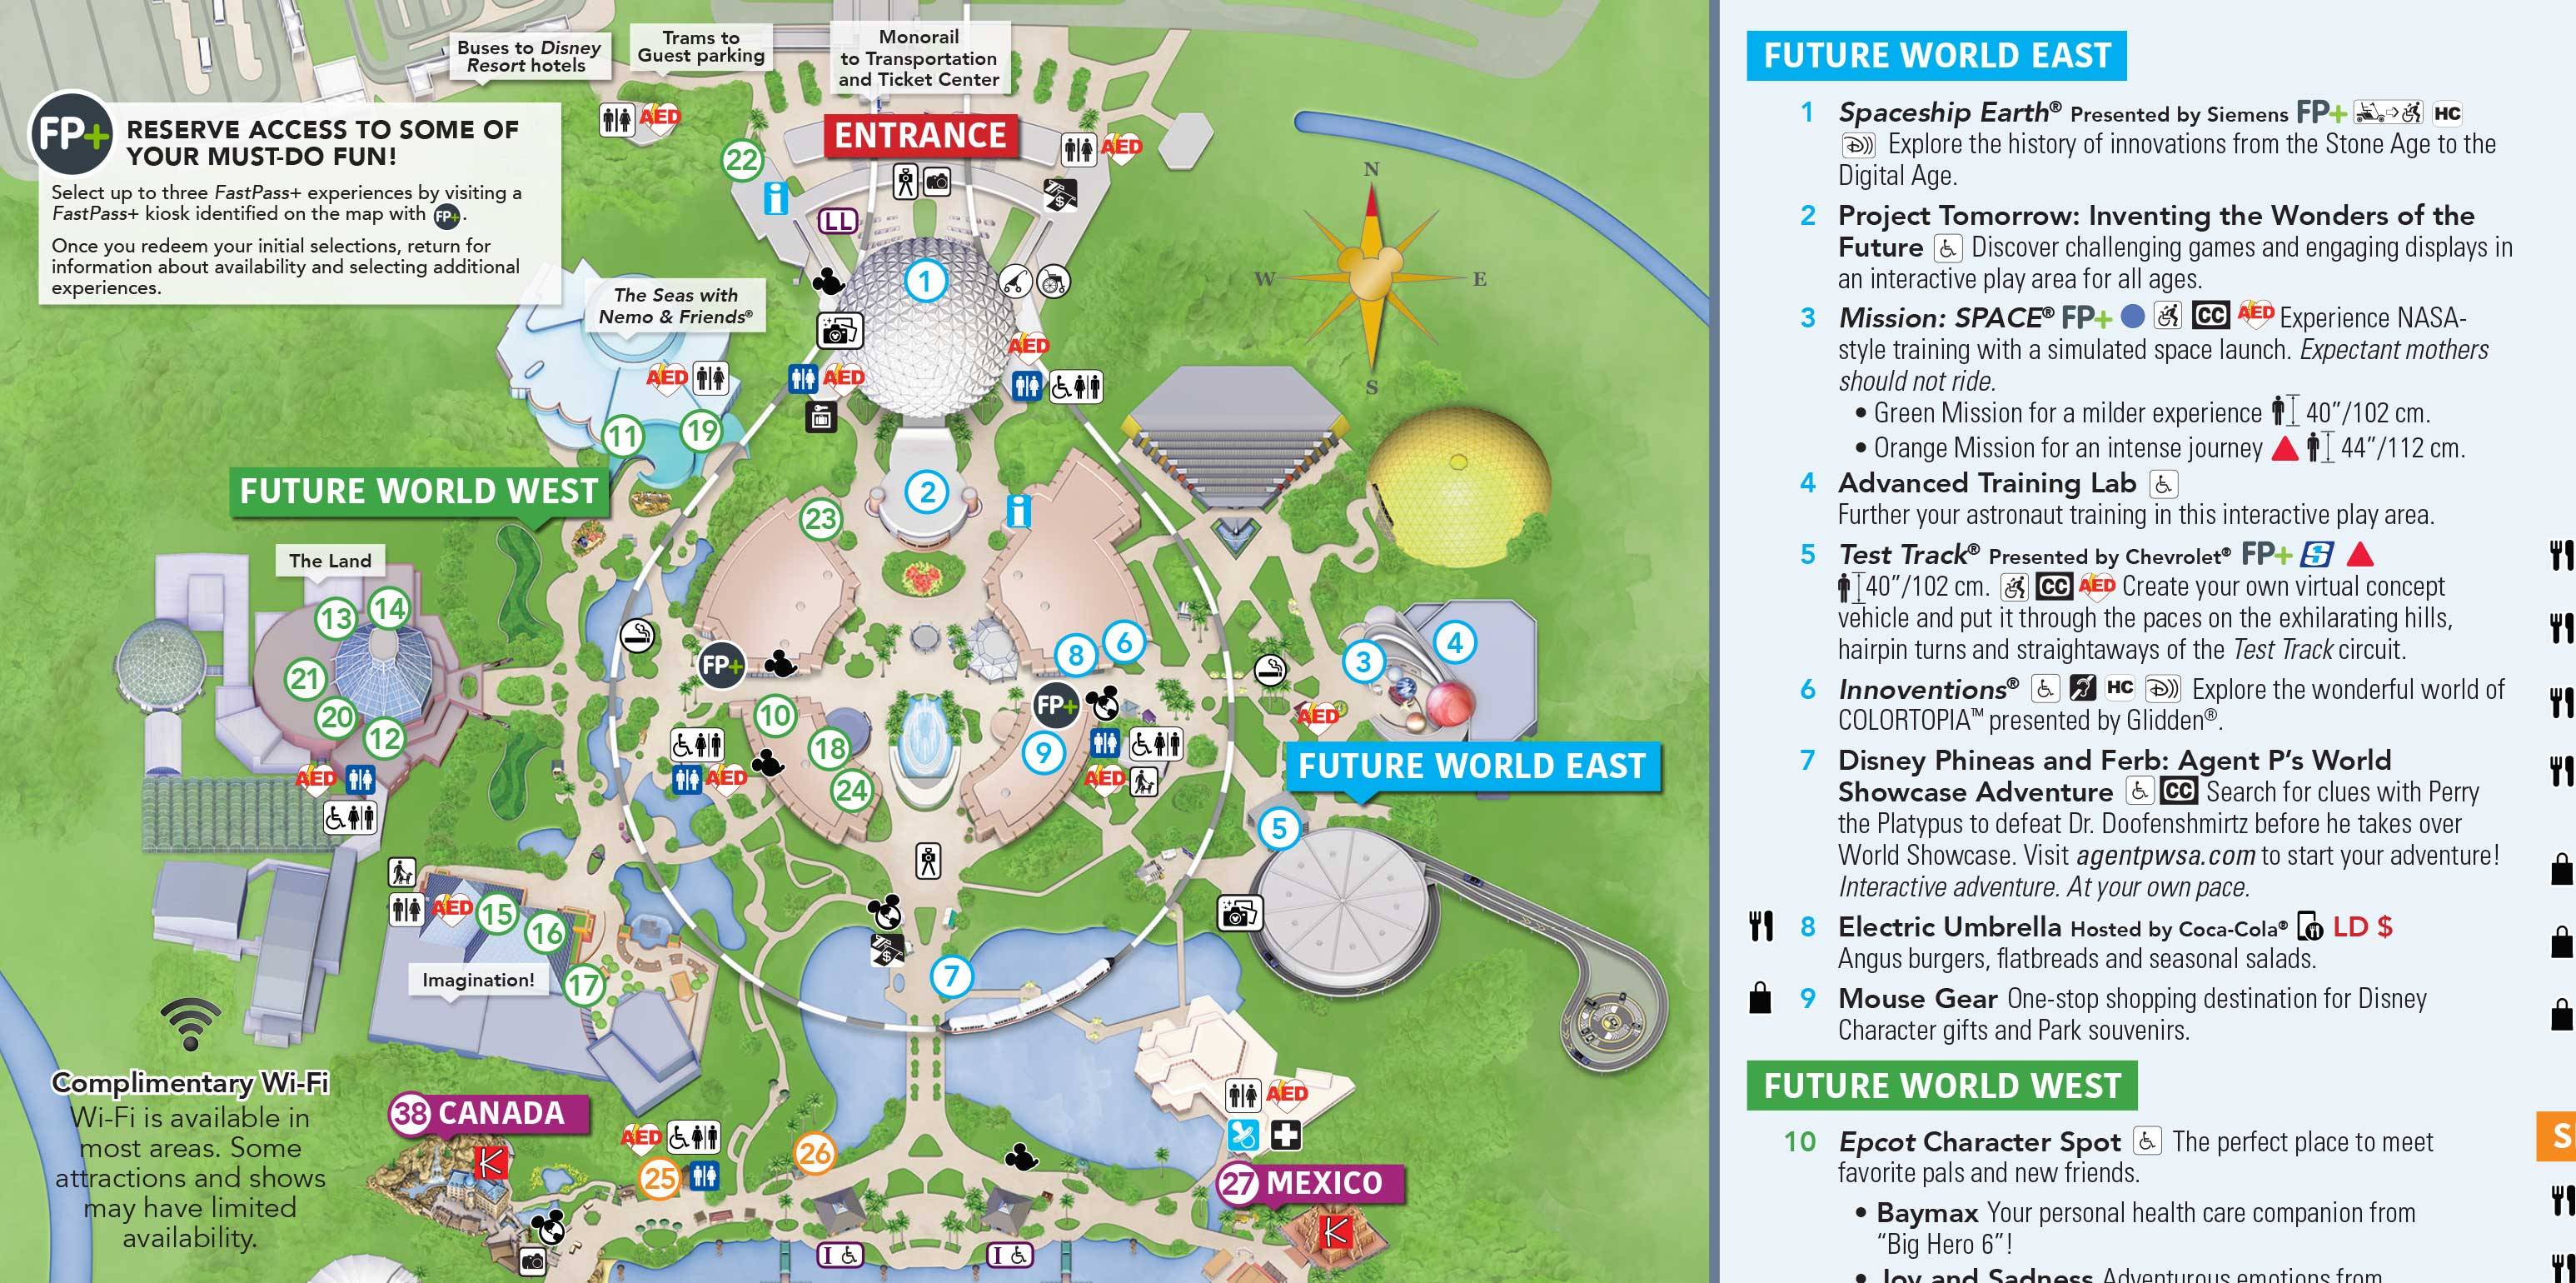 Siemens removed from the park map and signage